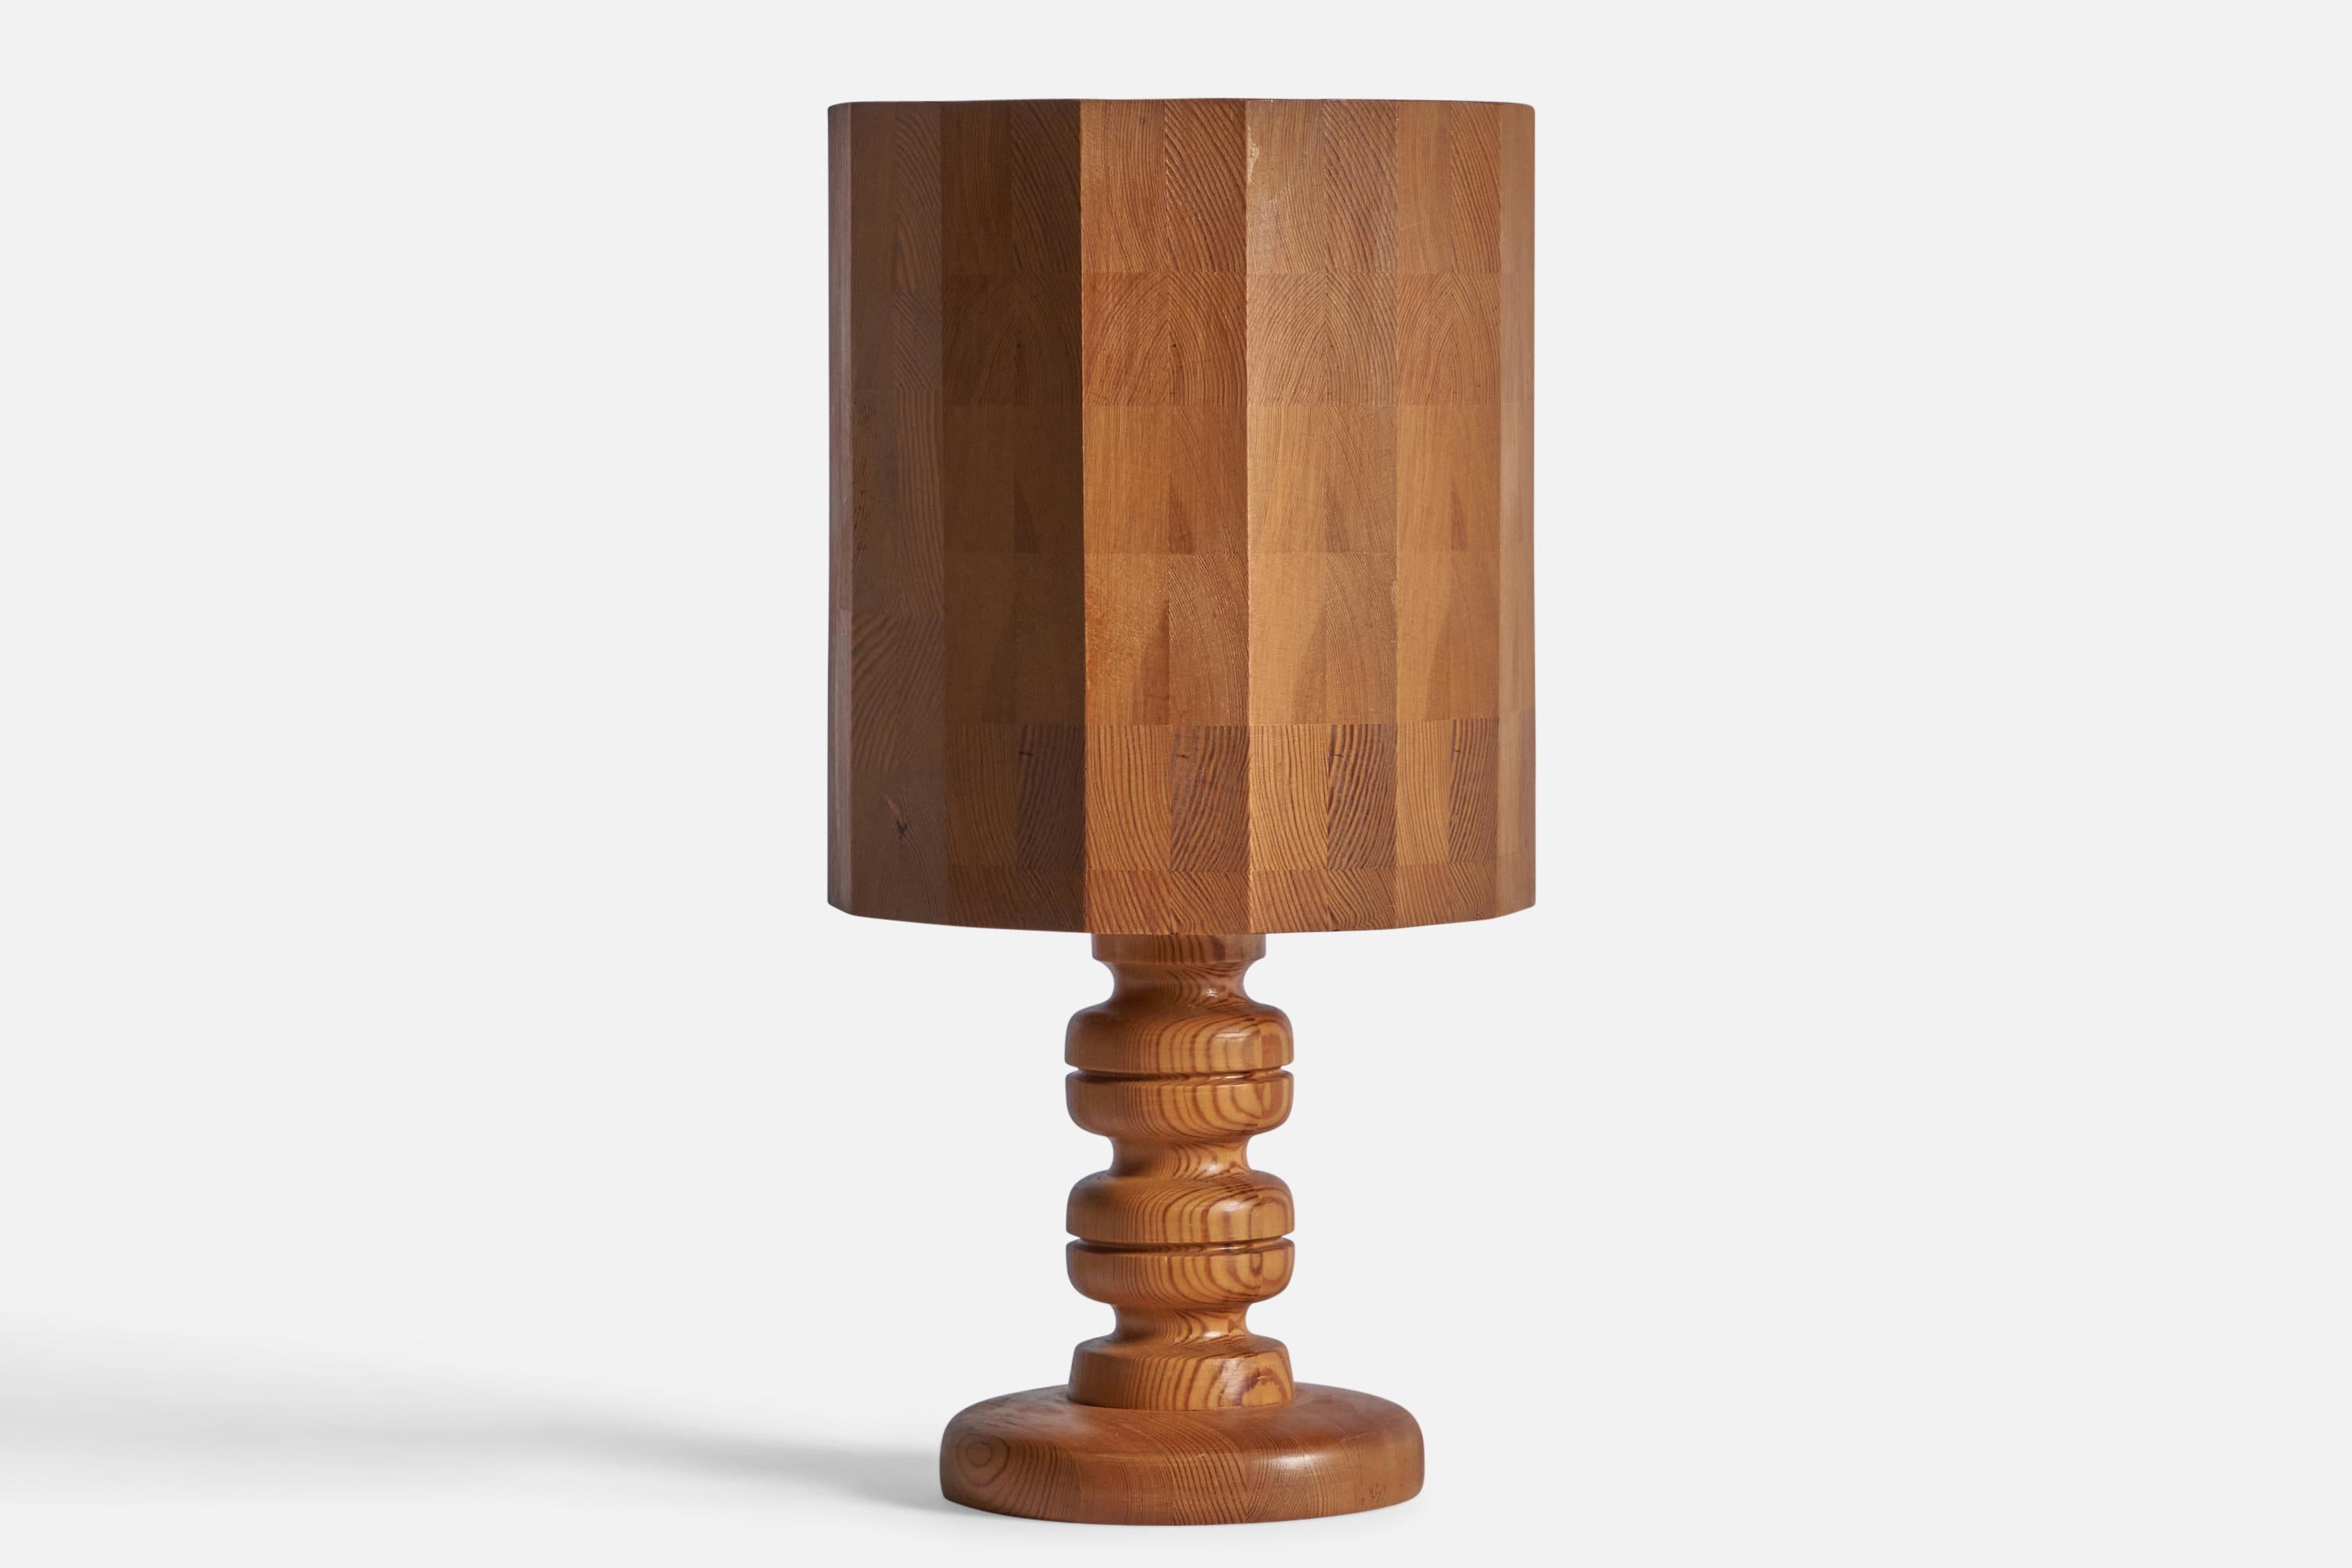 A sizeable solid pine table lamp, designed and produced in Sweden, 1970s.